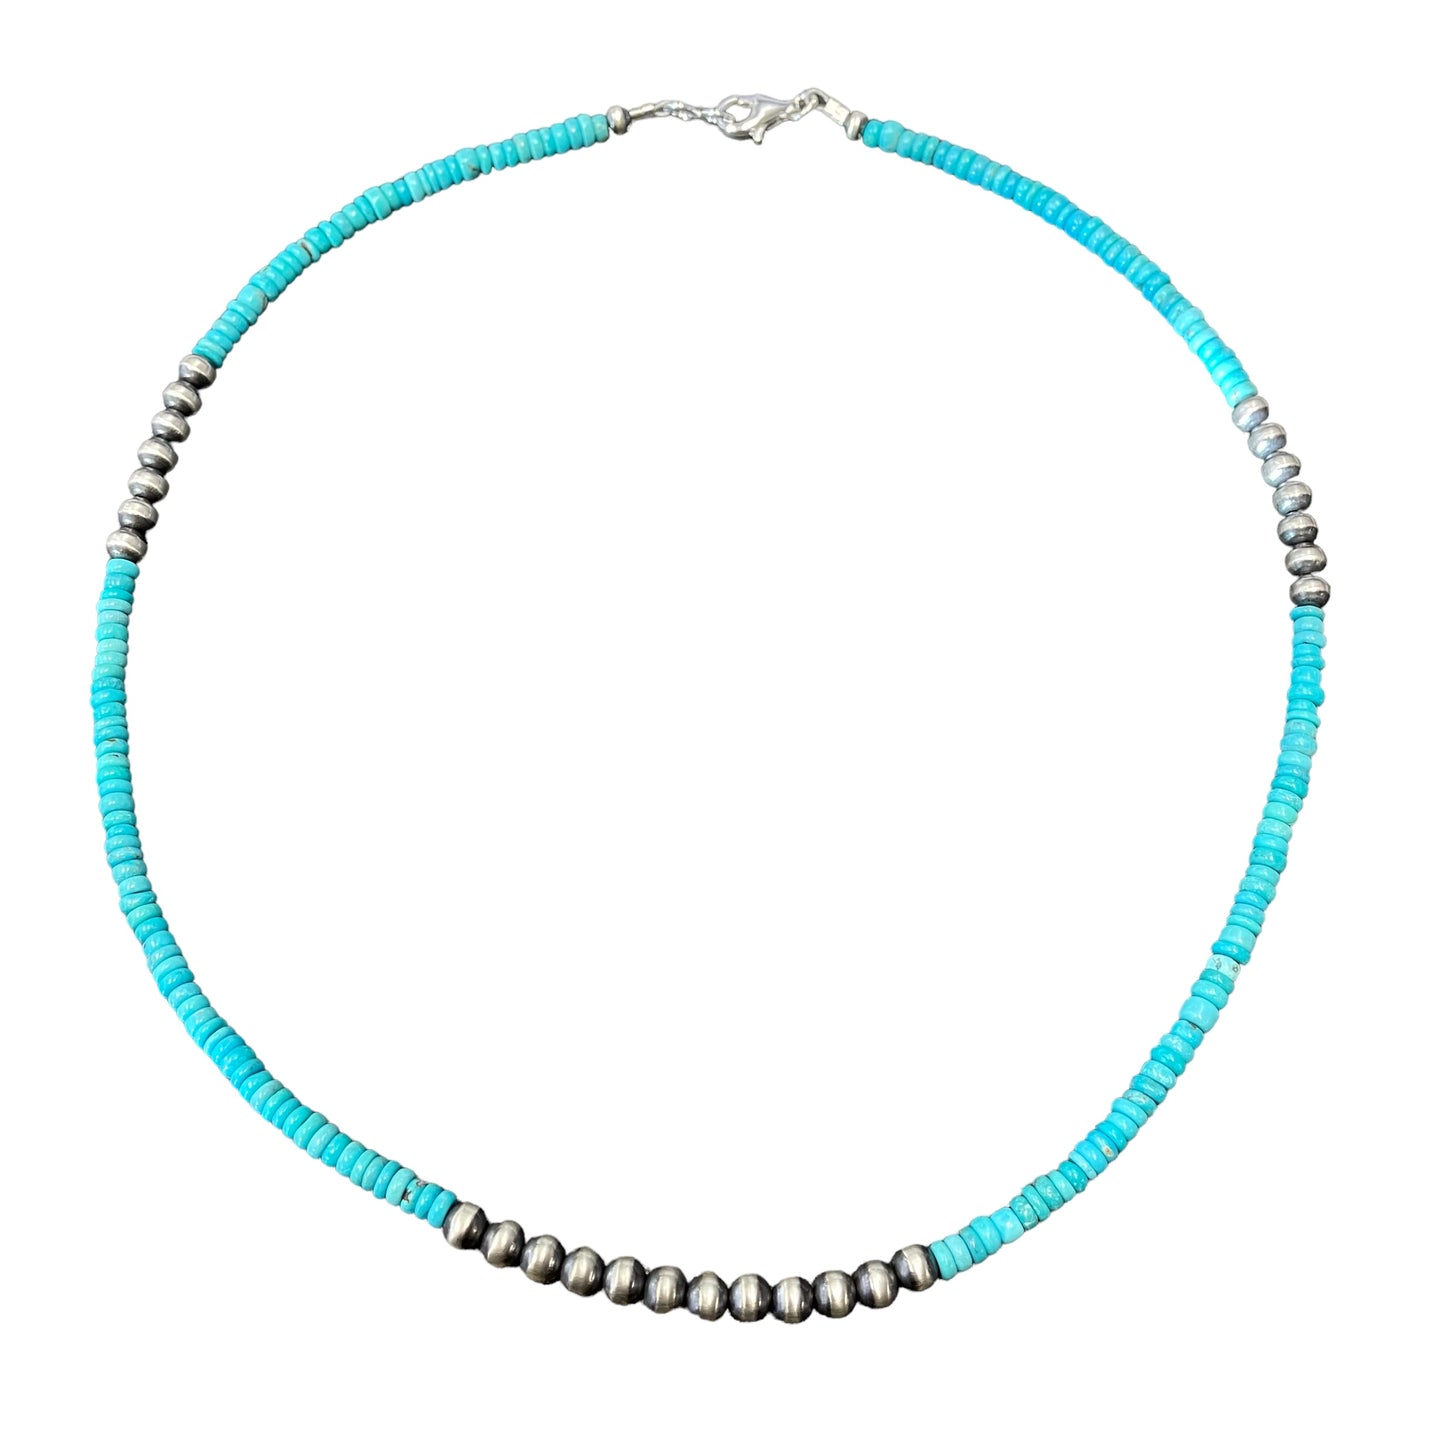 Blue Turquoise Desert Pearl Bead Necklace Sterling Silver